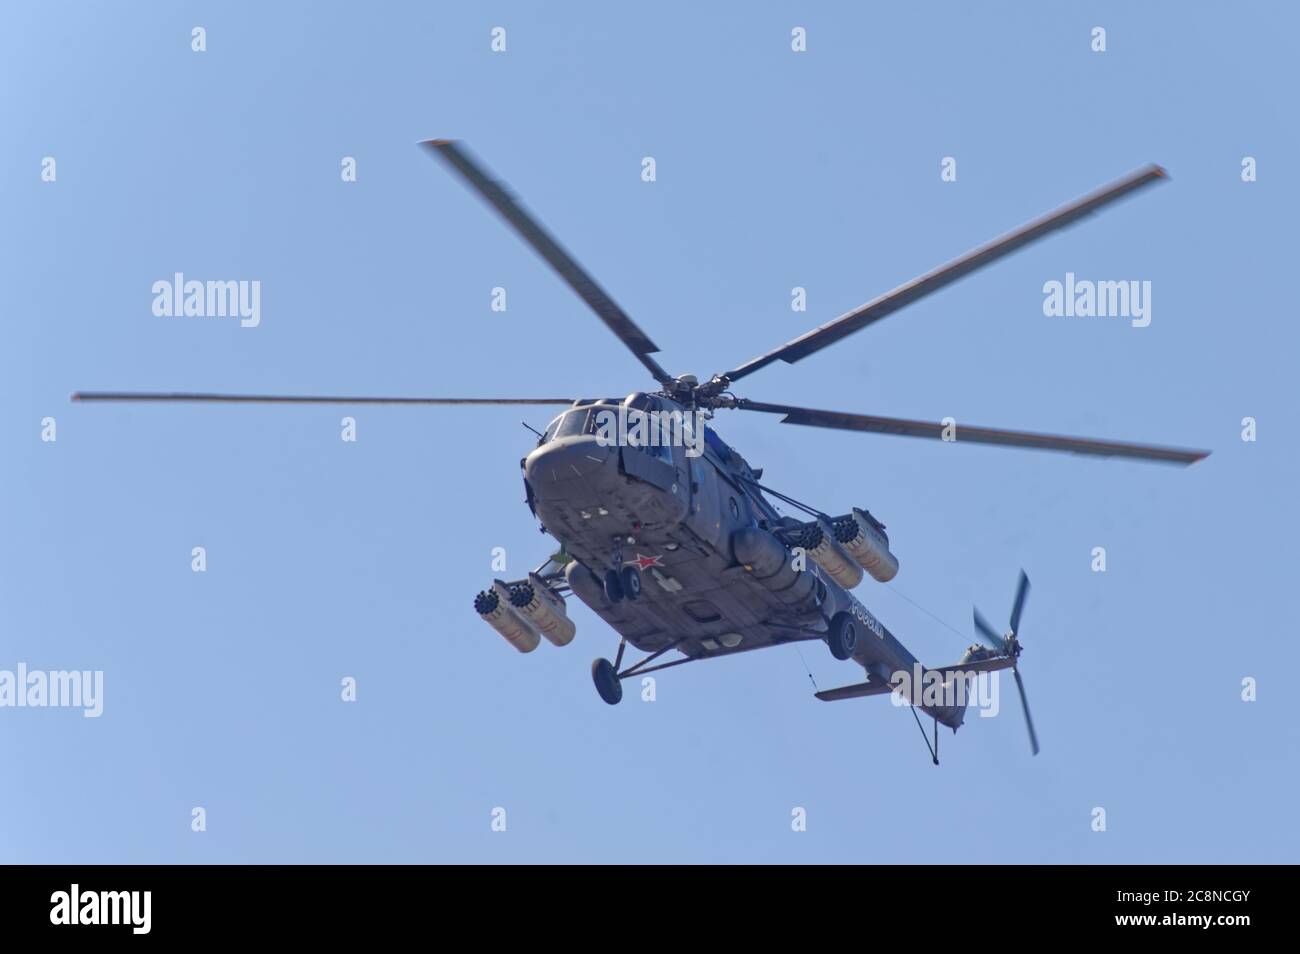 St. Petersburg, Russia - July 26, 2020: Helicopter Mil Mi-8 Hip in the sky during the military parade dedicated to the Russian Navy Day. The parade is the main event of the celebrations held annually in the last Sunday of July Stock Photo